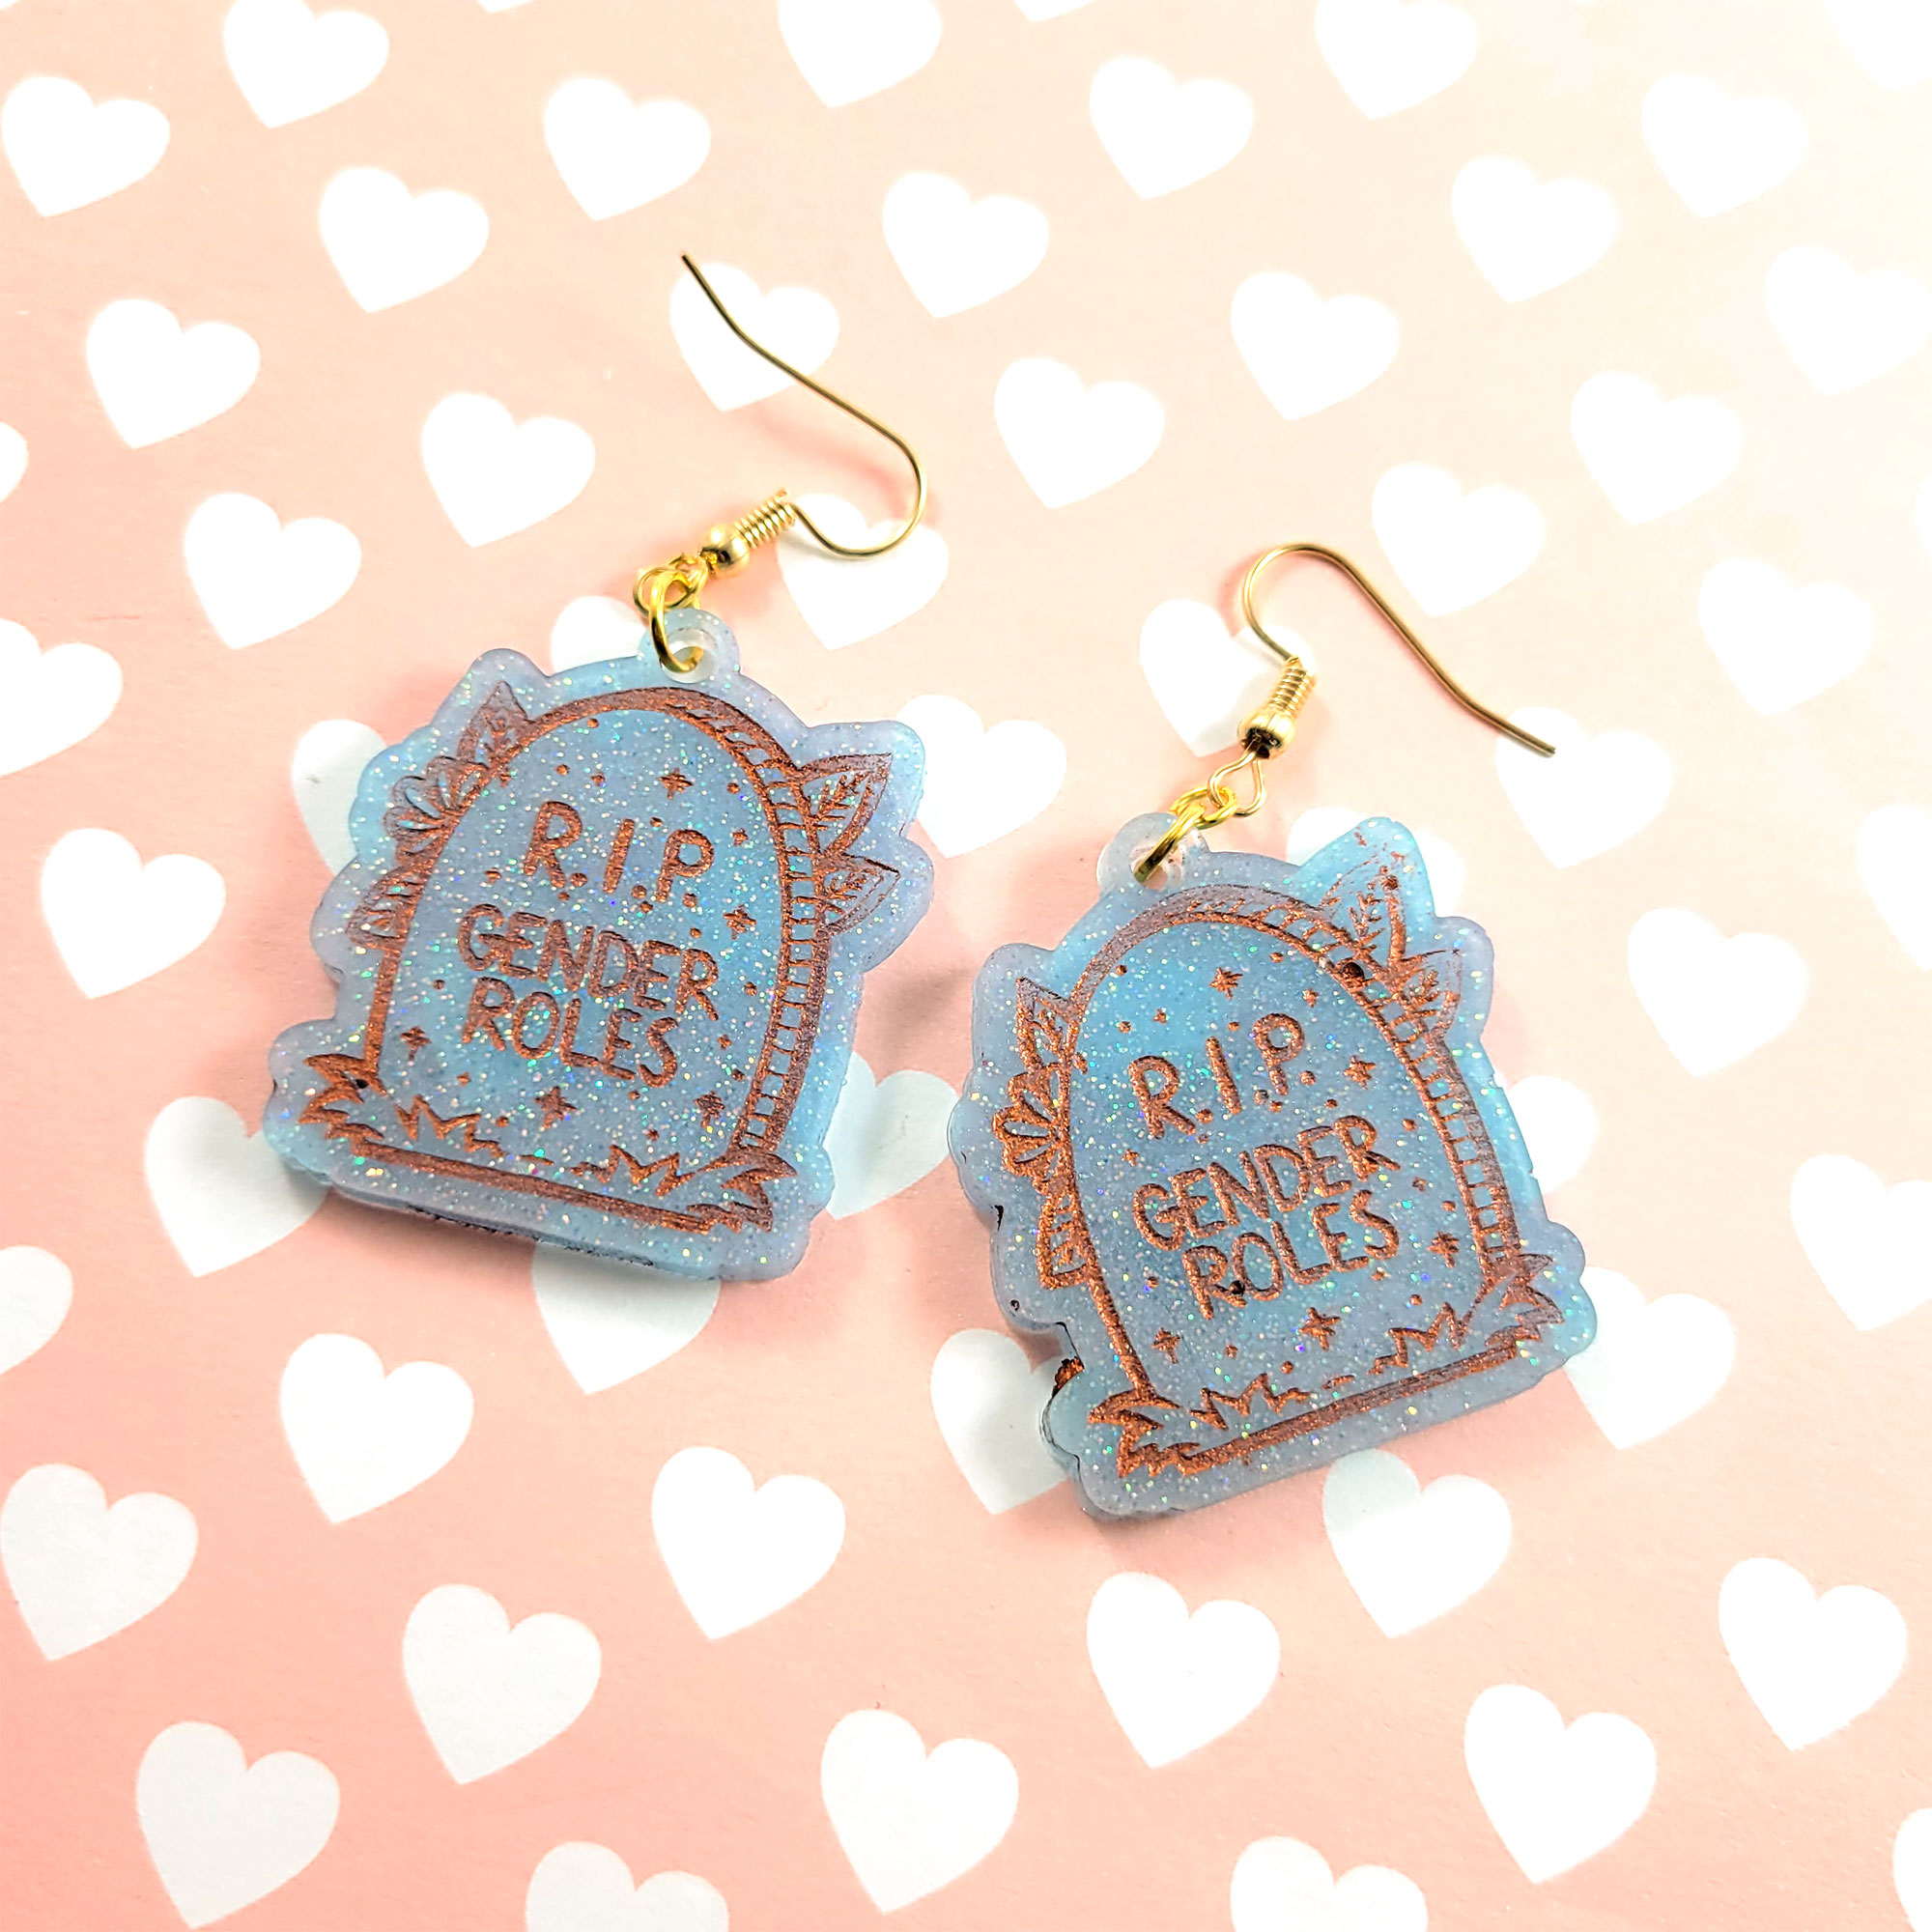 Light Blue and Copper RIP Gender Roles Gravestone Earrings by Wilde Designs